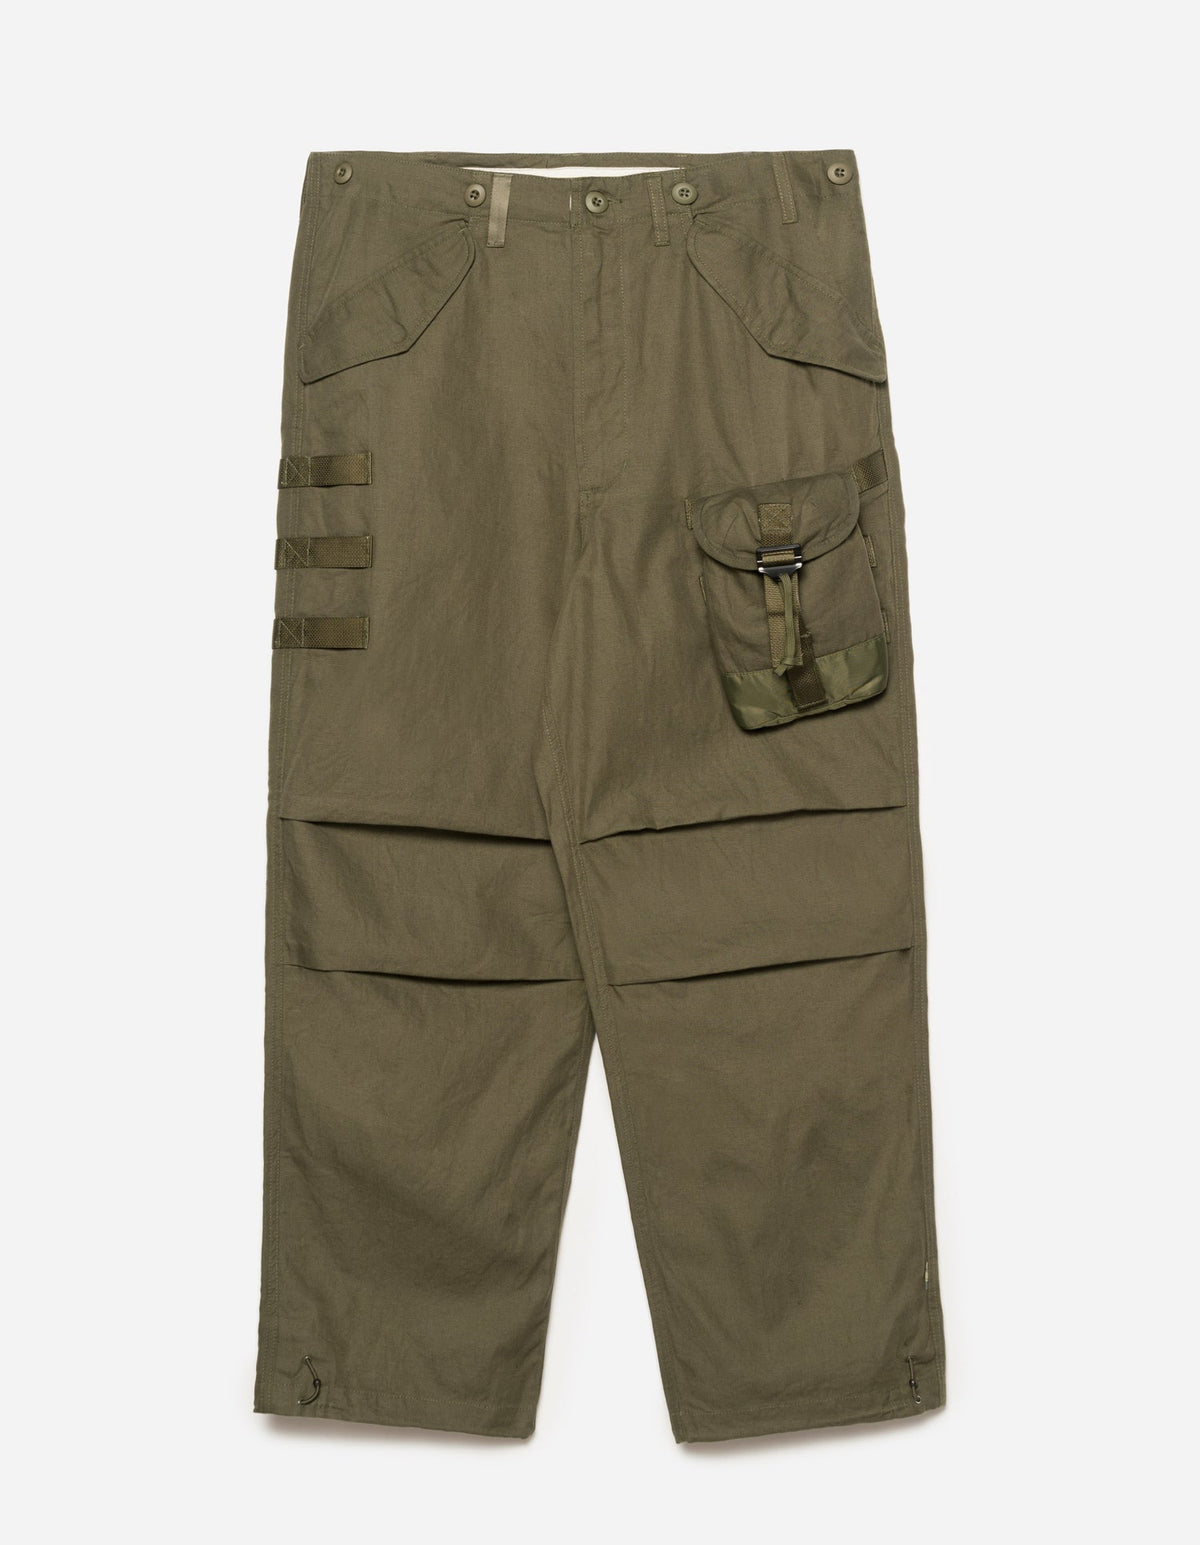 5051 M.A.L.I.C.E. M51 Cargo Pants in Olive